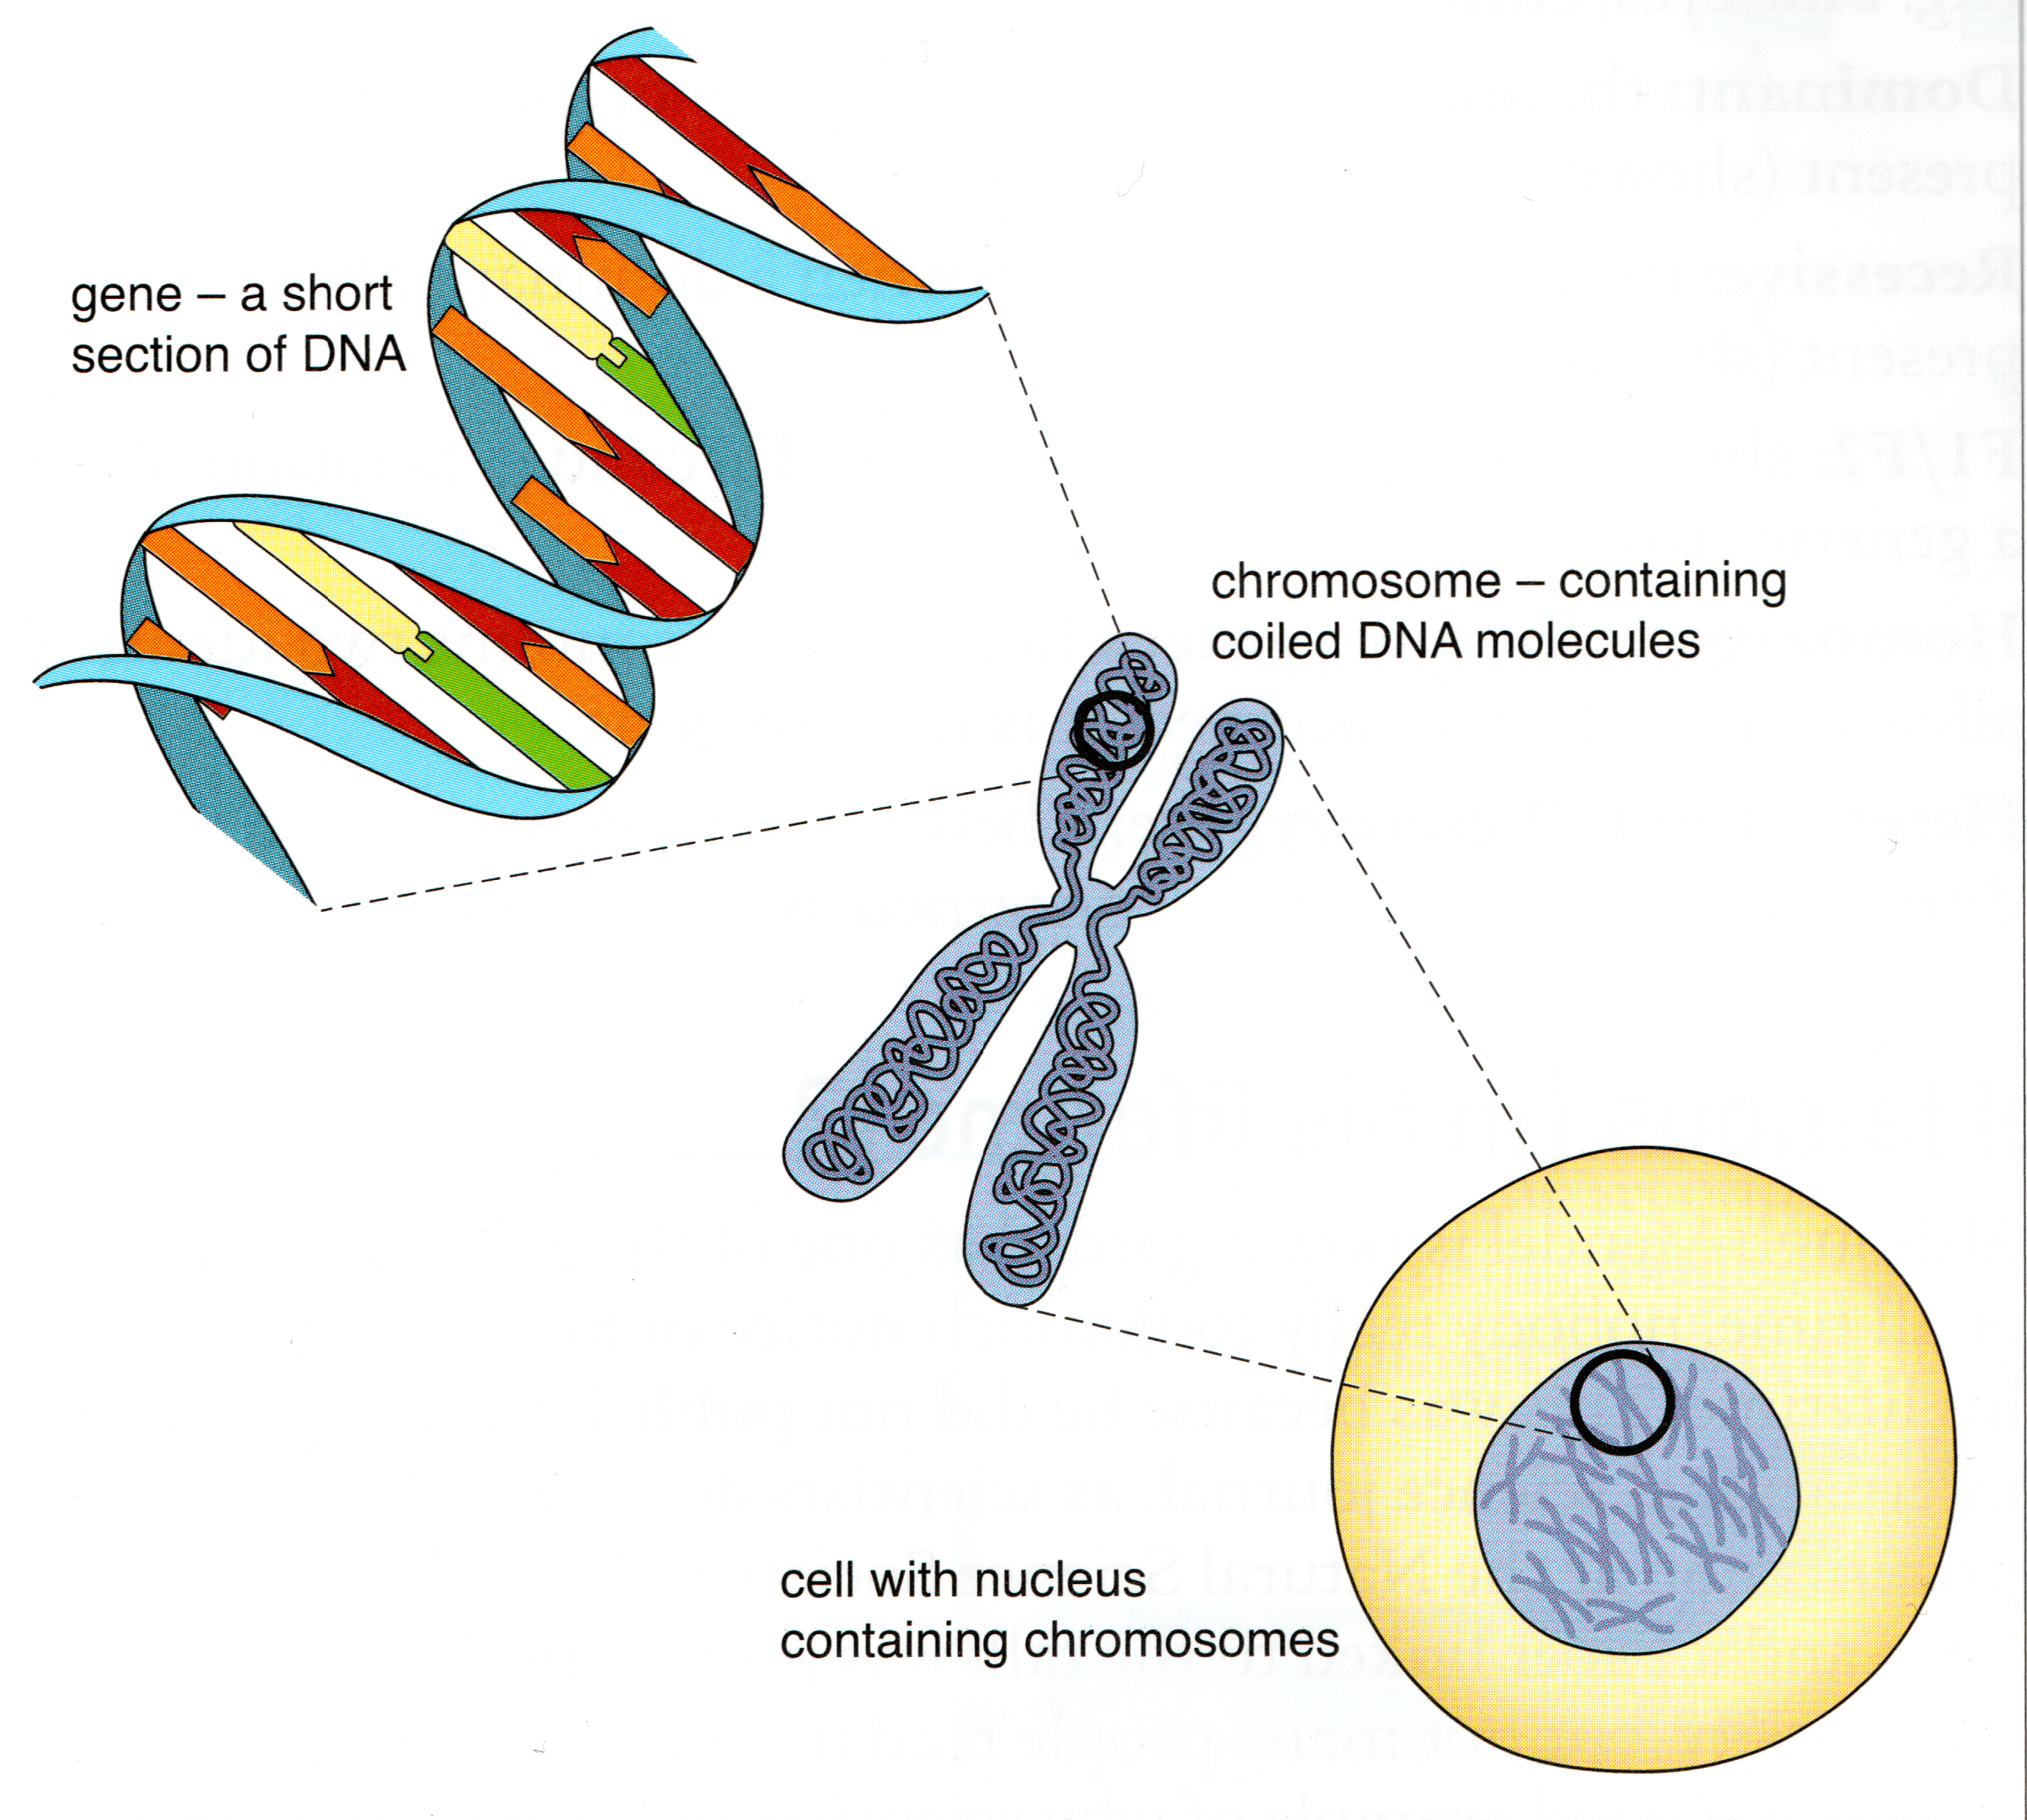 Image of relationship between nucleus, chromosome and gene